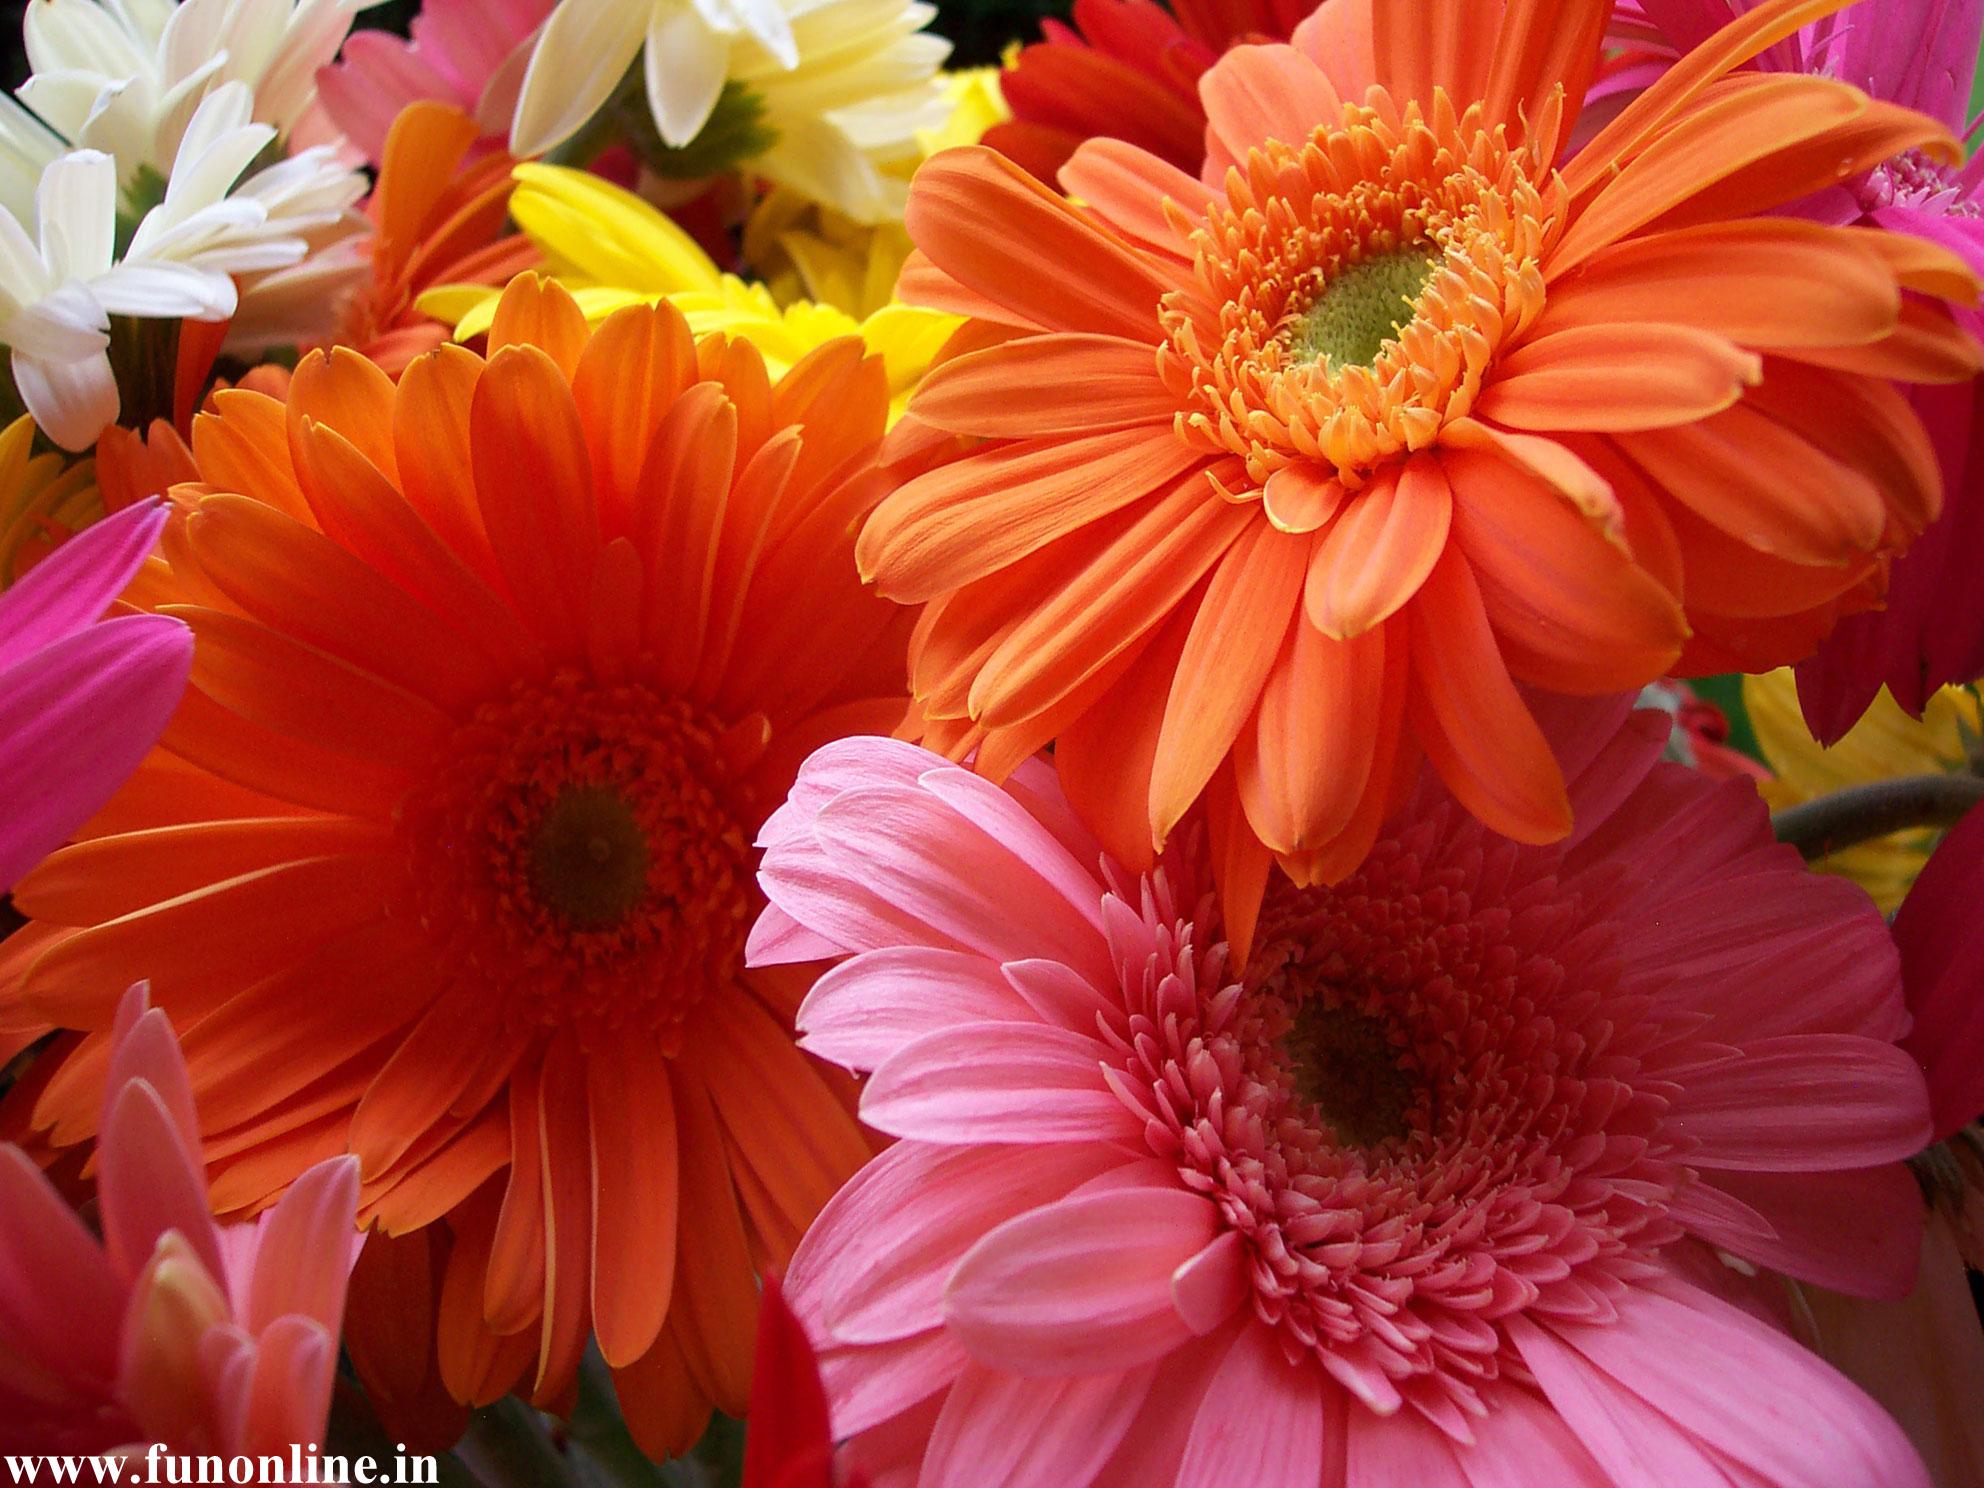 Top Colorful Gerbera Daisy Wallpaper Images for Pinterest